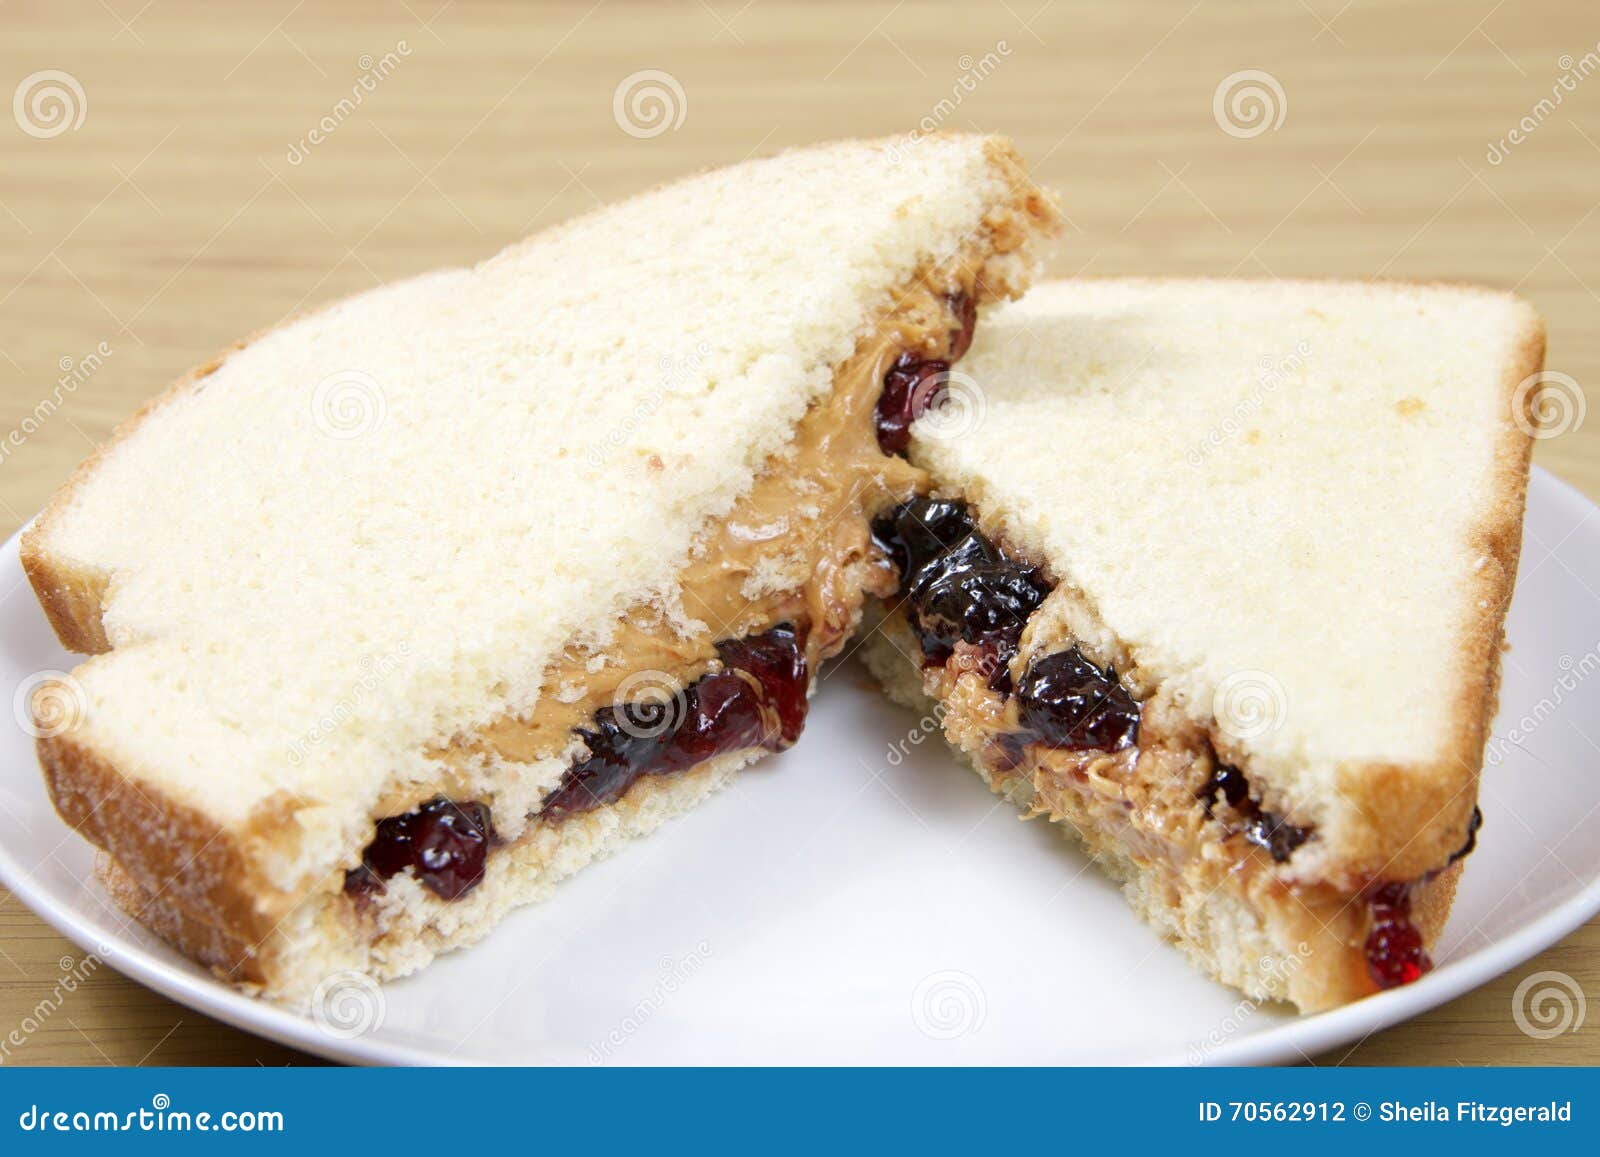 Open Faced Peanut Butter Jelly Sandwich Photos Free Royalty Free Stock Photos From Dreamstime